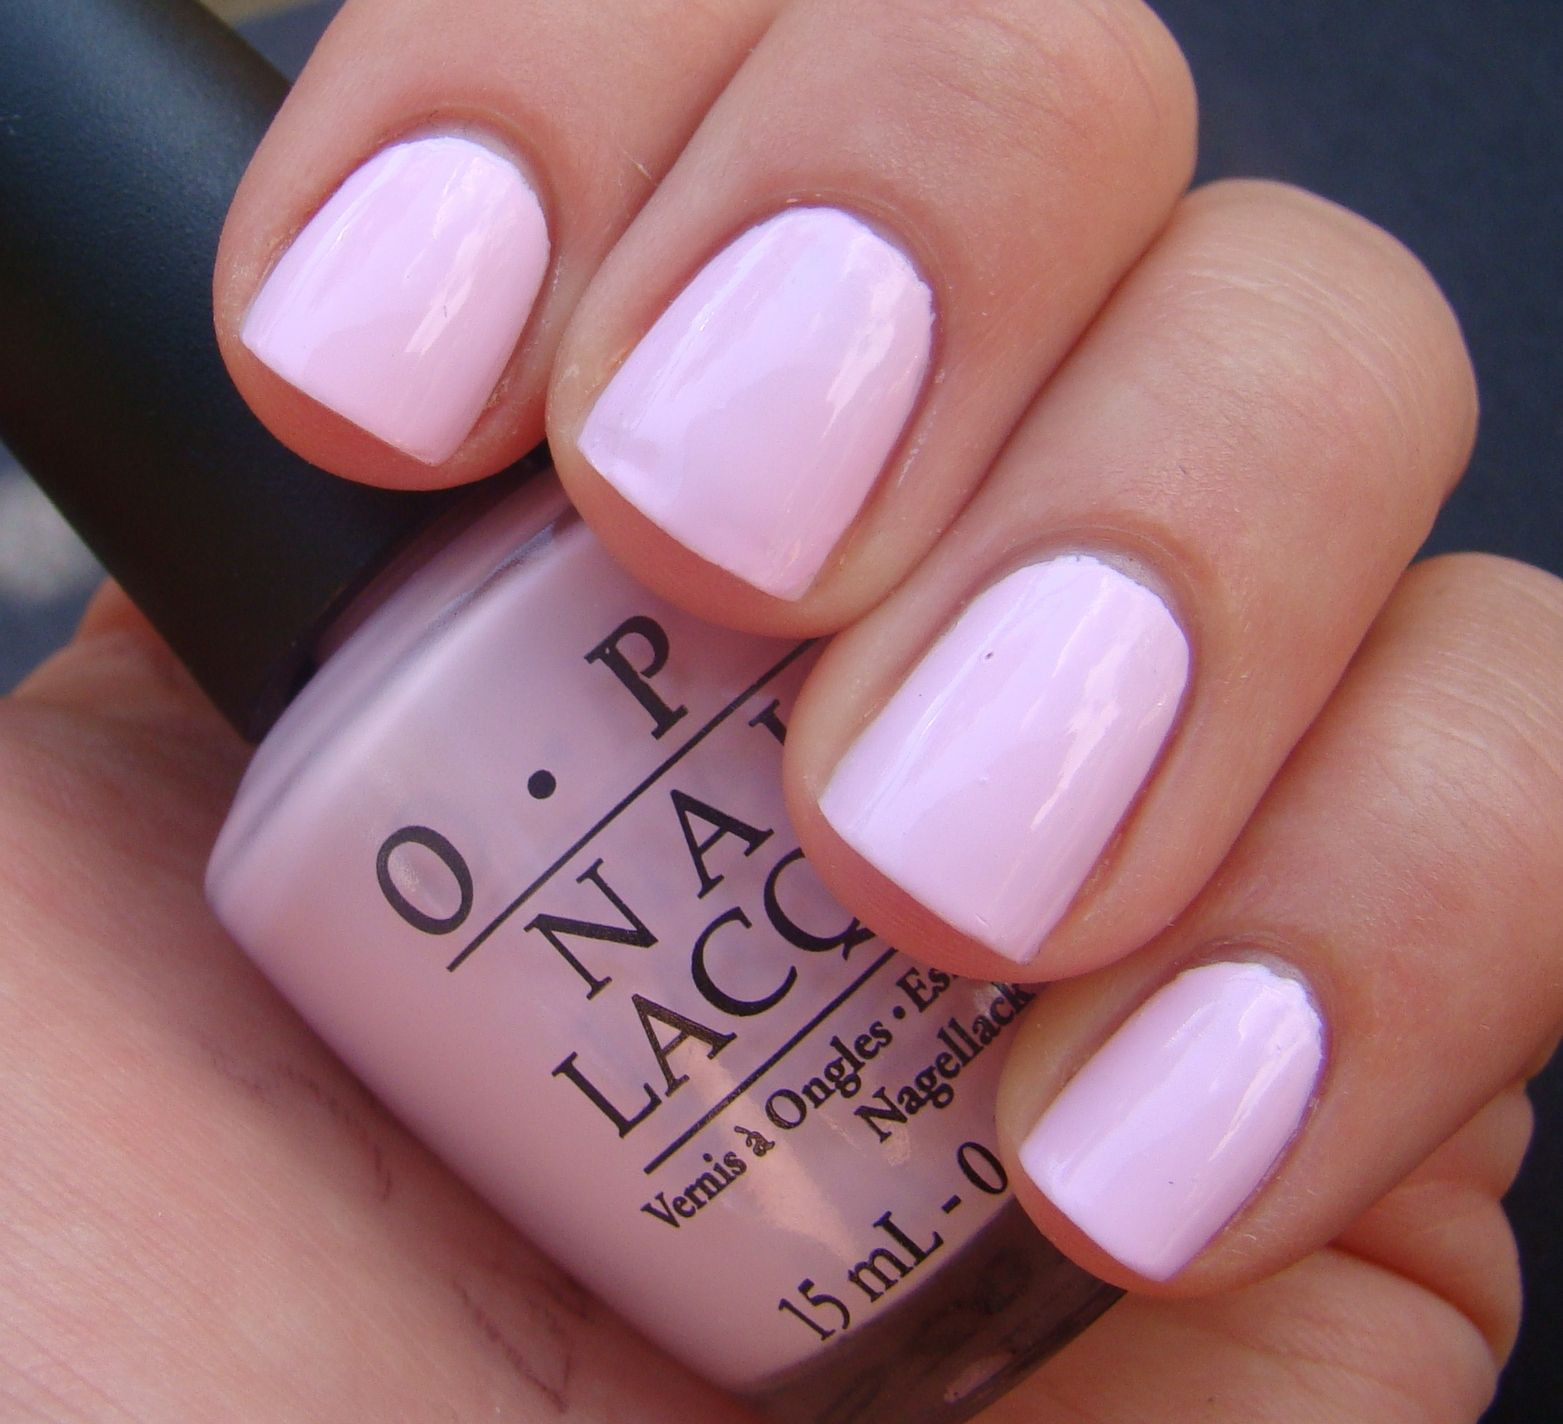 Opi Pink Nail Colors
 Mod about you OPI you can never go wrong with a soft pink